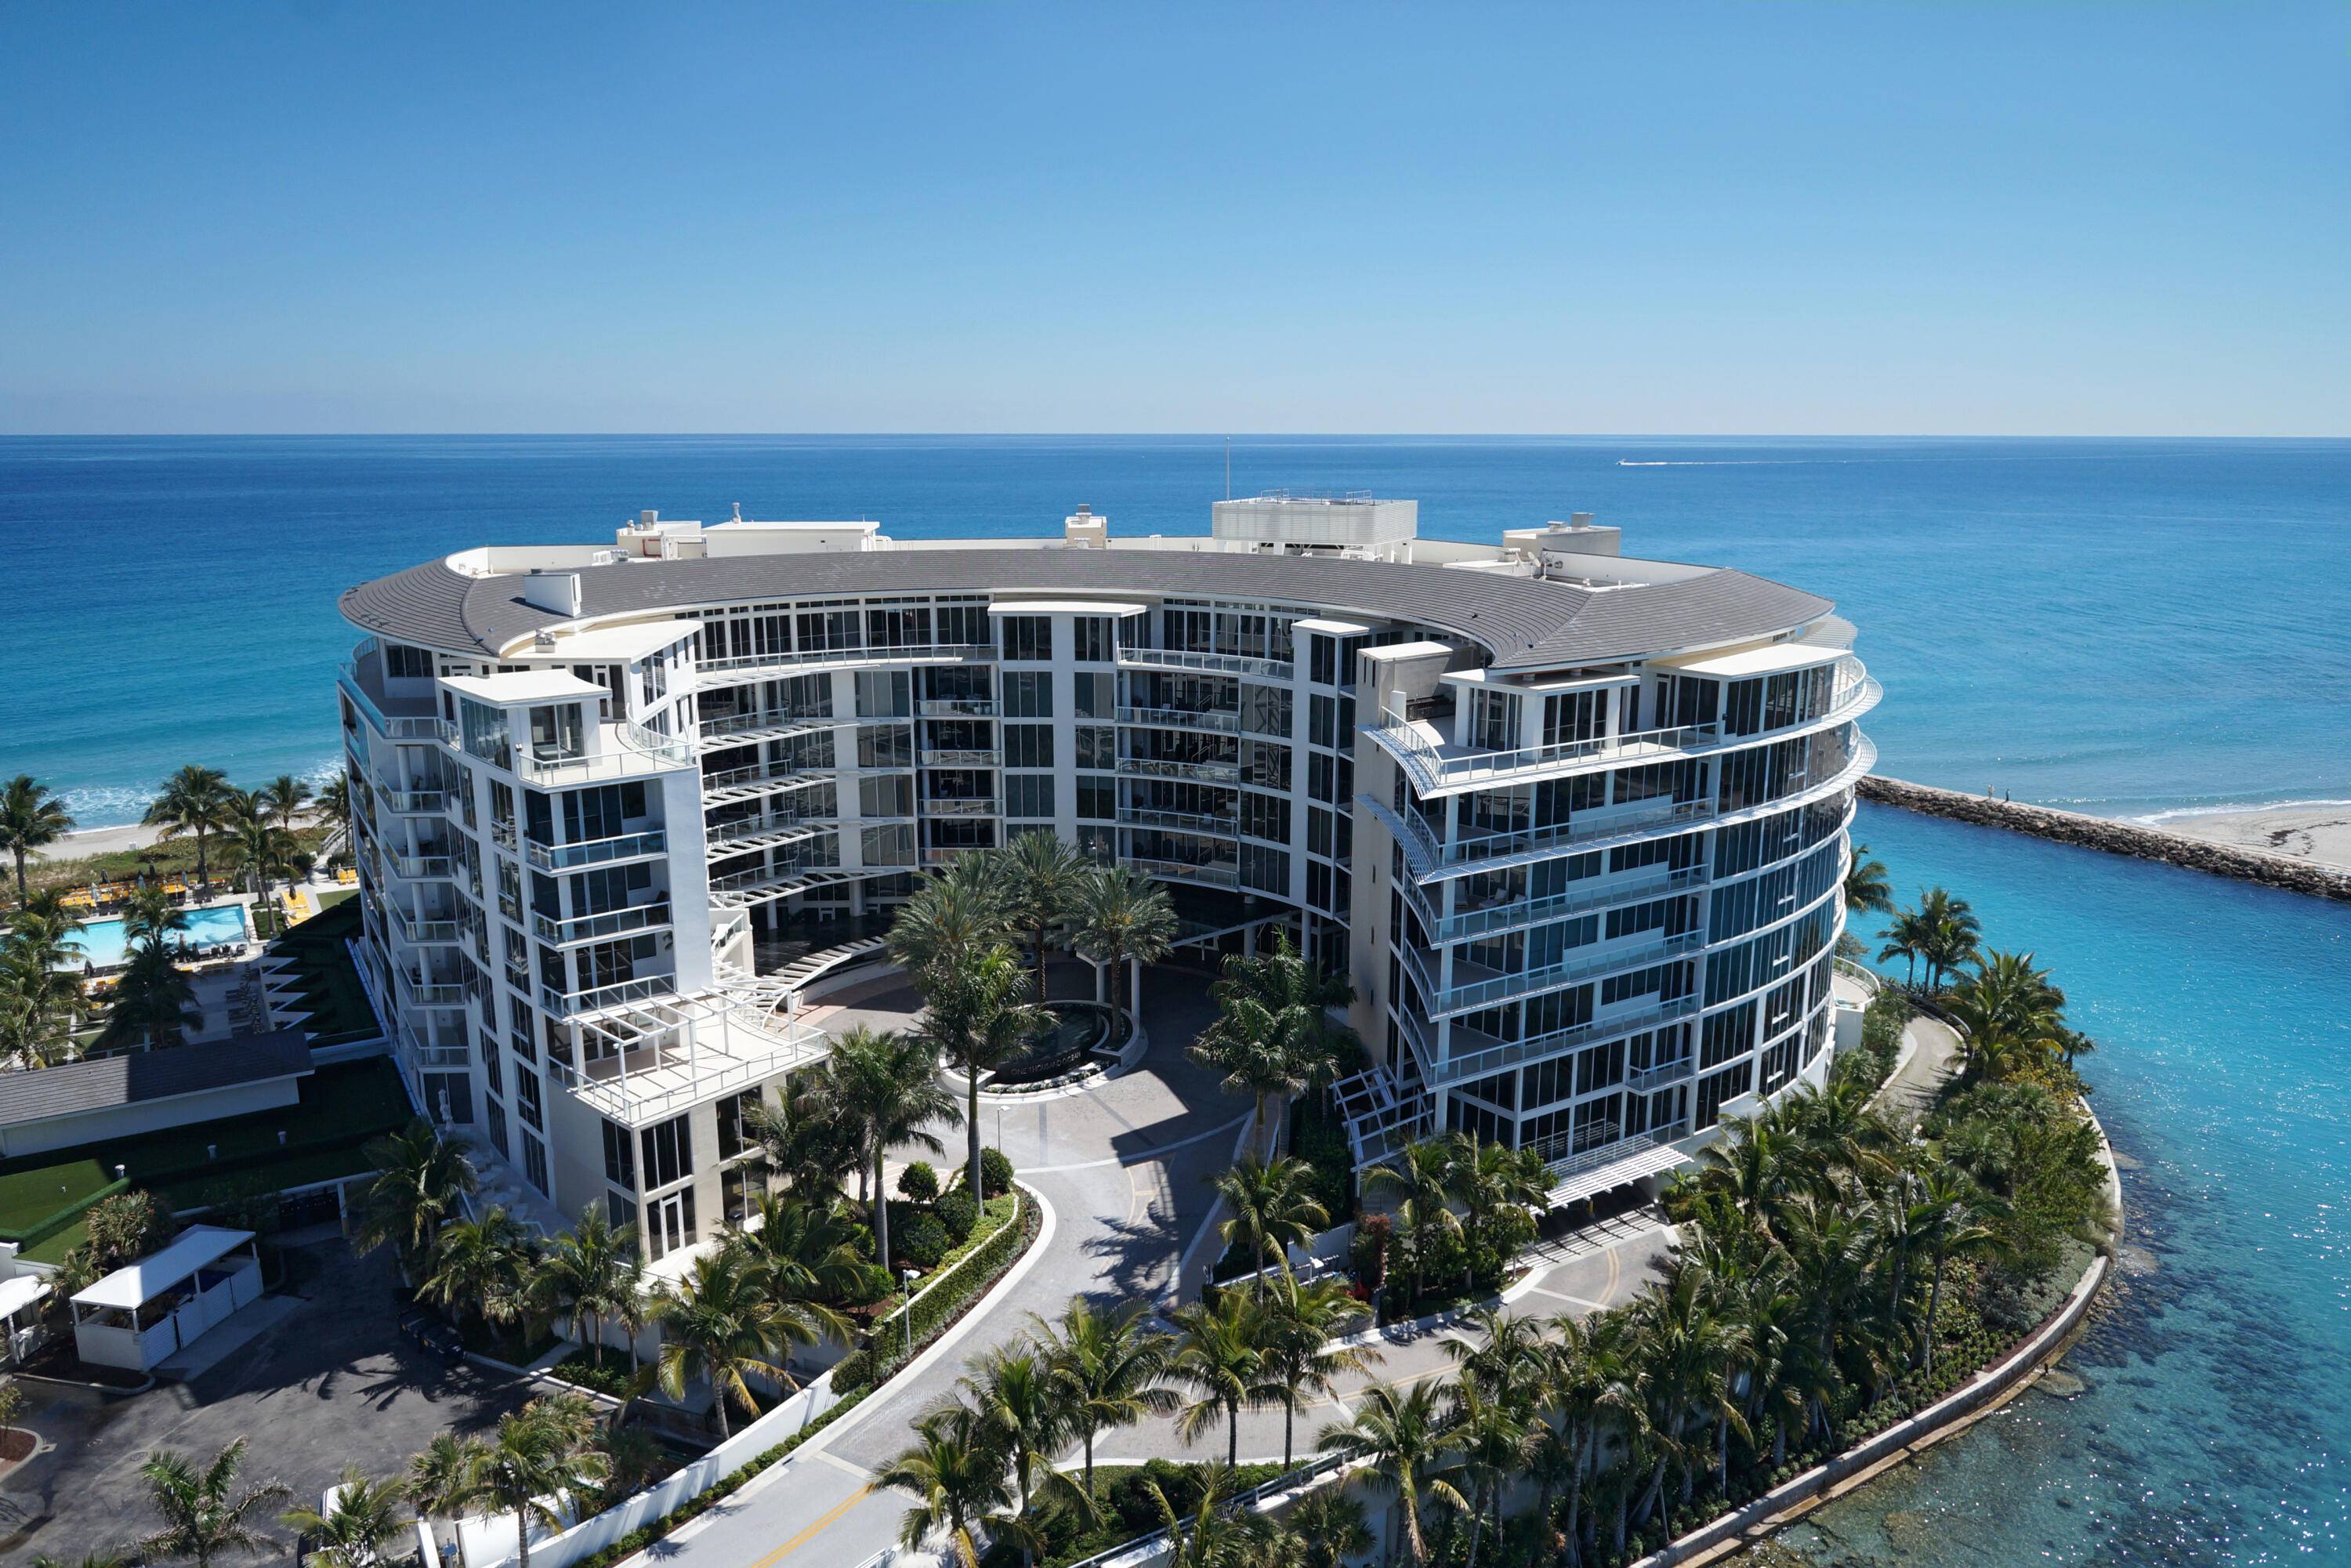 STUNNING ULTRA LUXURY RESIDENCE AT ONE THOUSAND OCEAN ON THE GATED GROUNDS OF THE BOCA BEACH CLUB WITH OUTSTANDING WATER VIEWS IN EVERY DIRECTION.